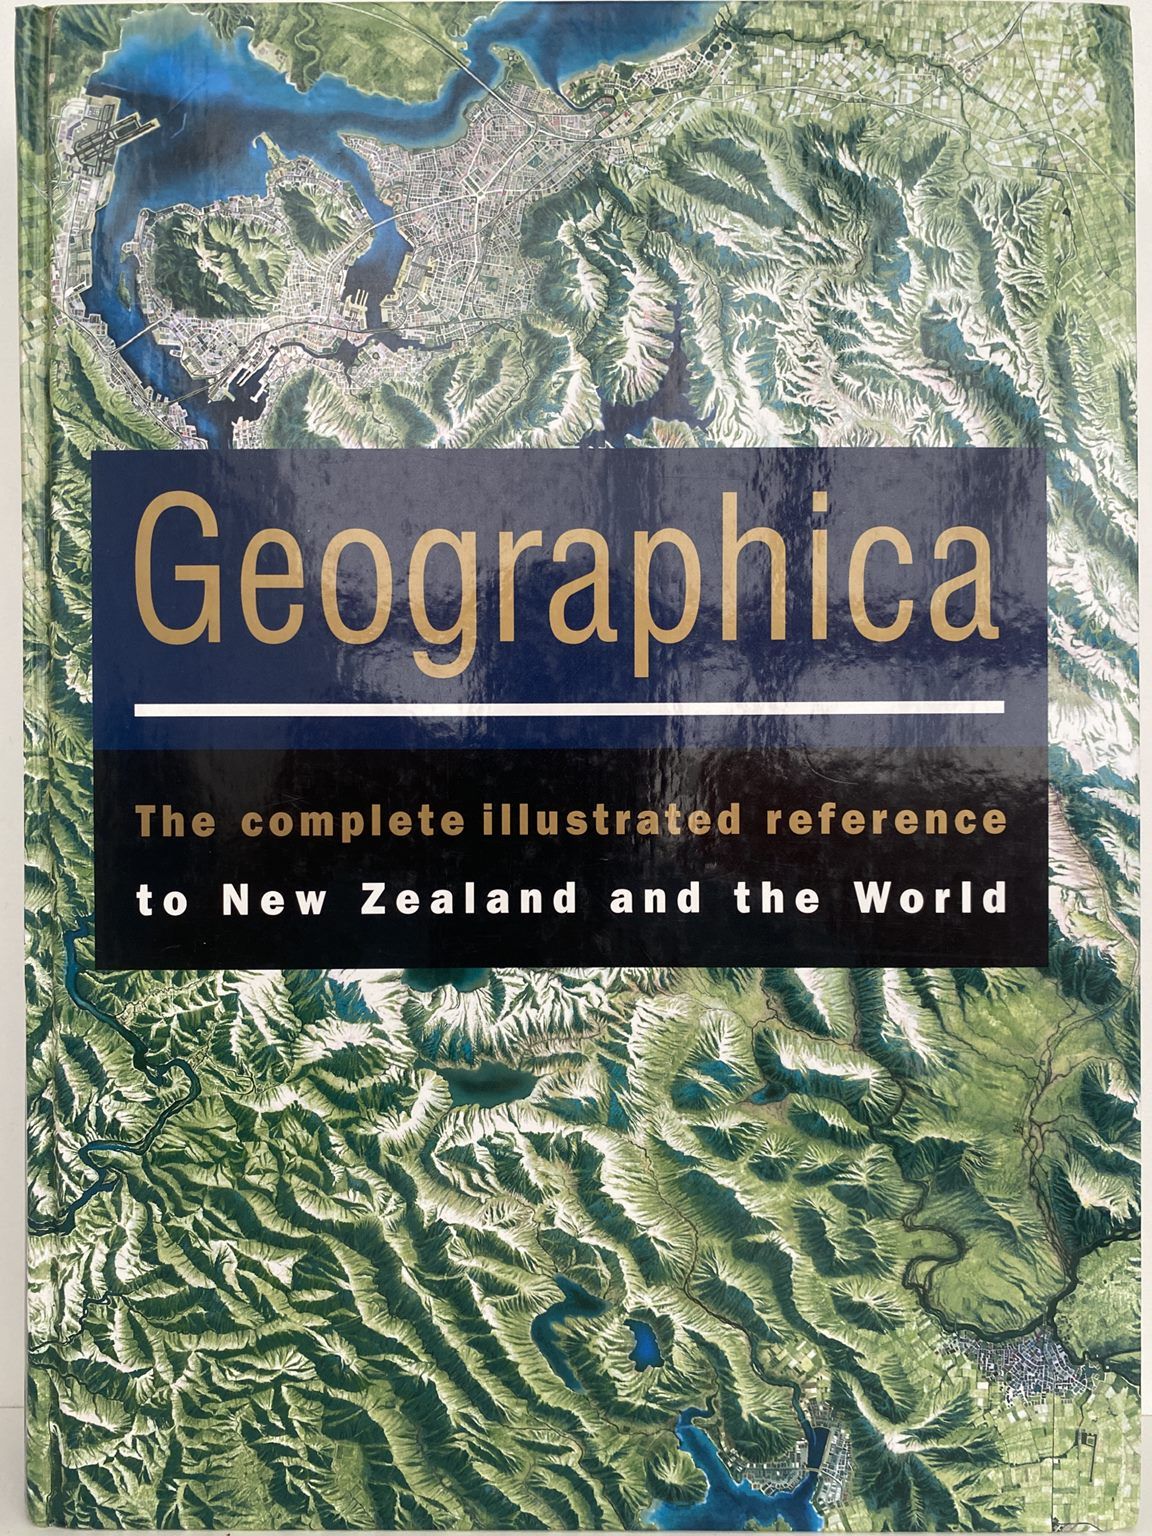 GEOGRAPHICA: The complete illustrated reference to New Zealand and the World